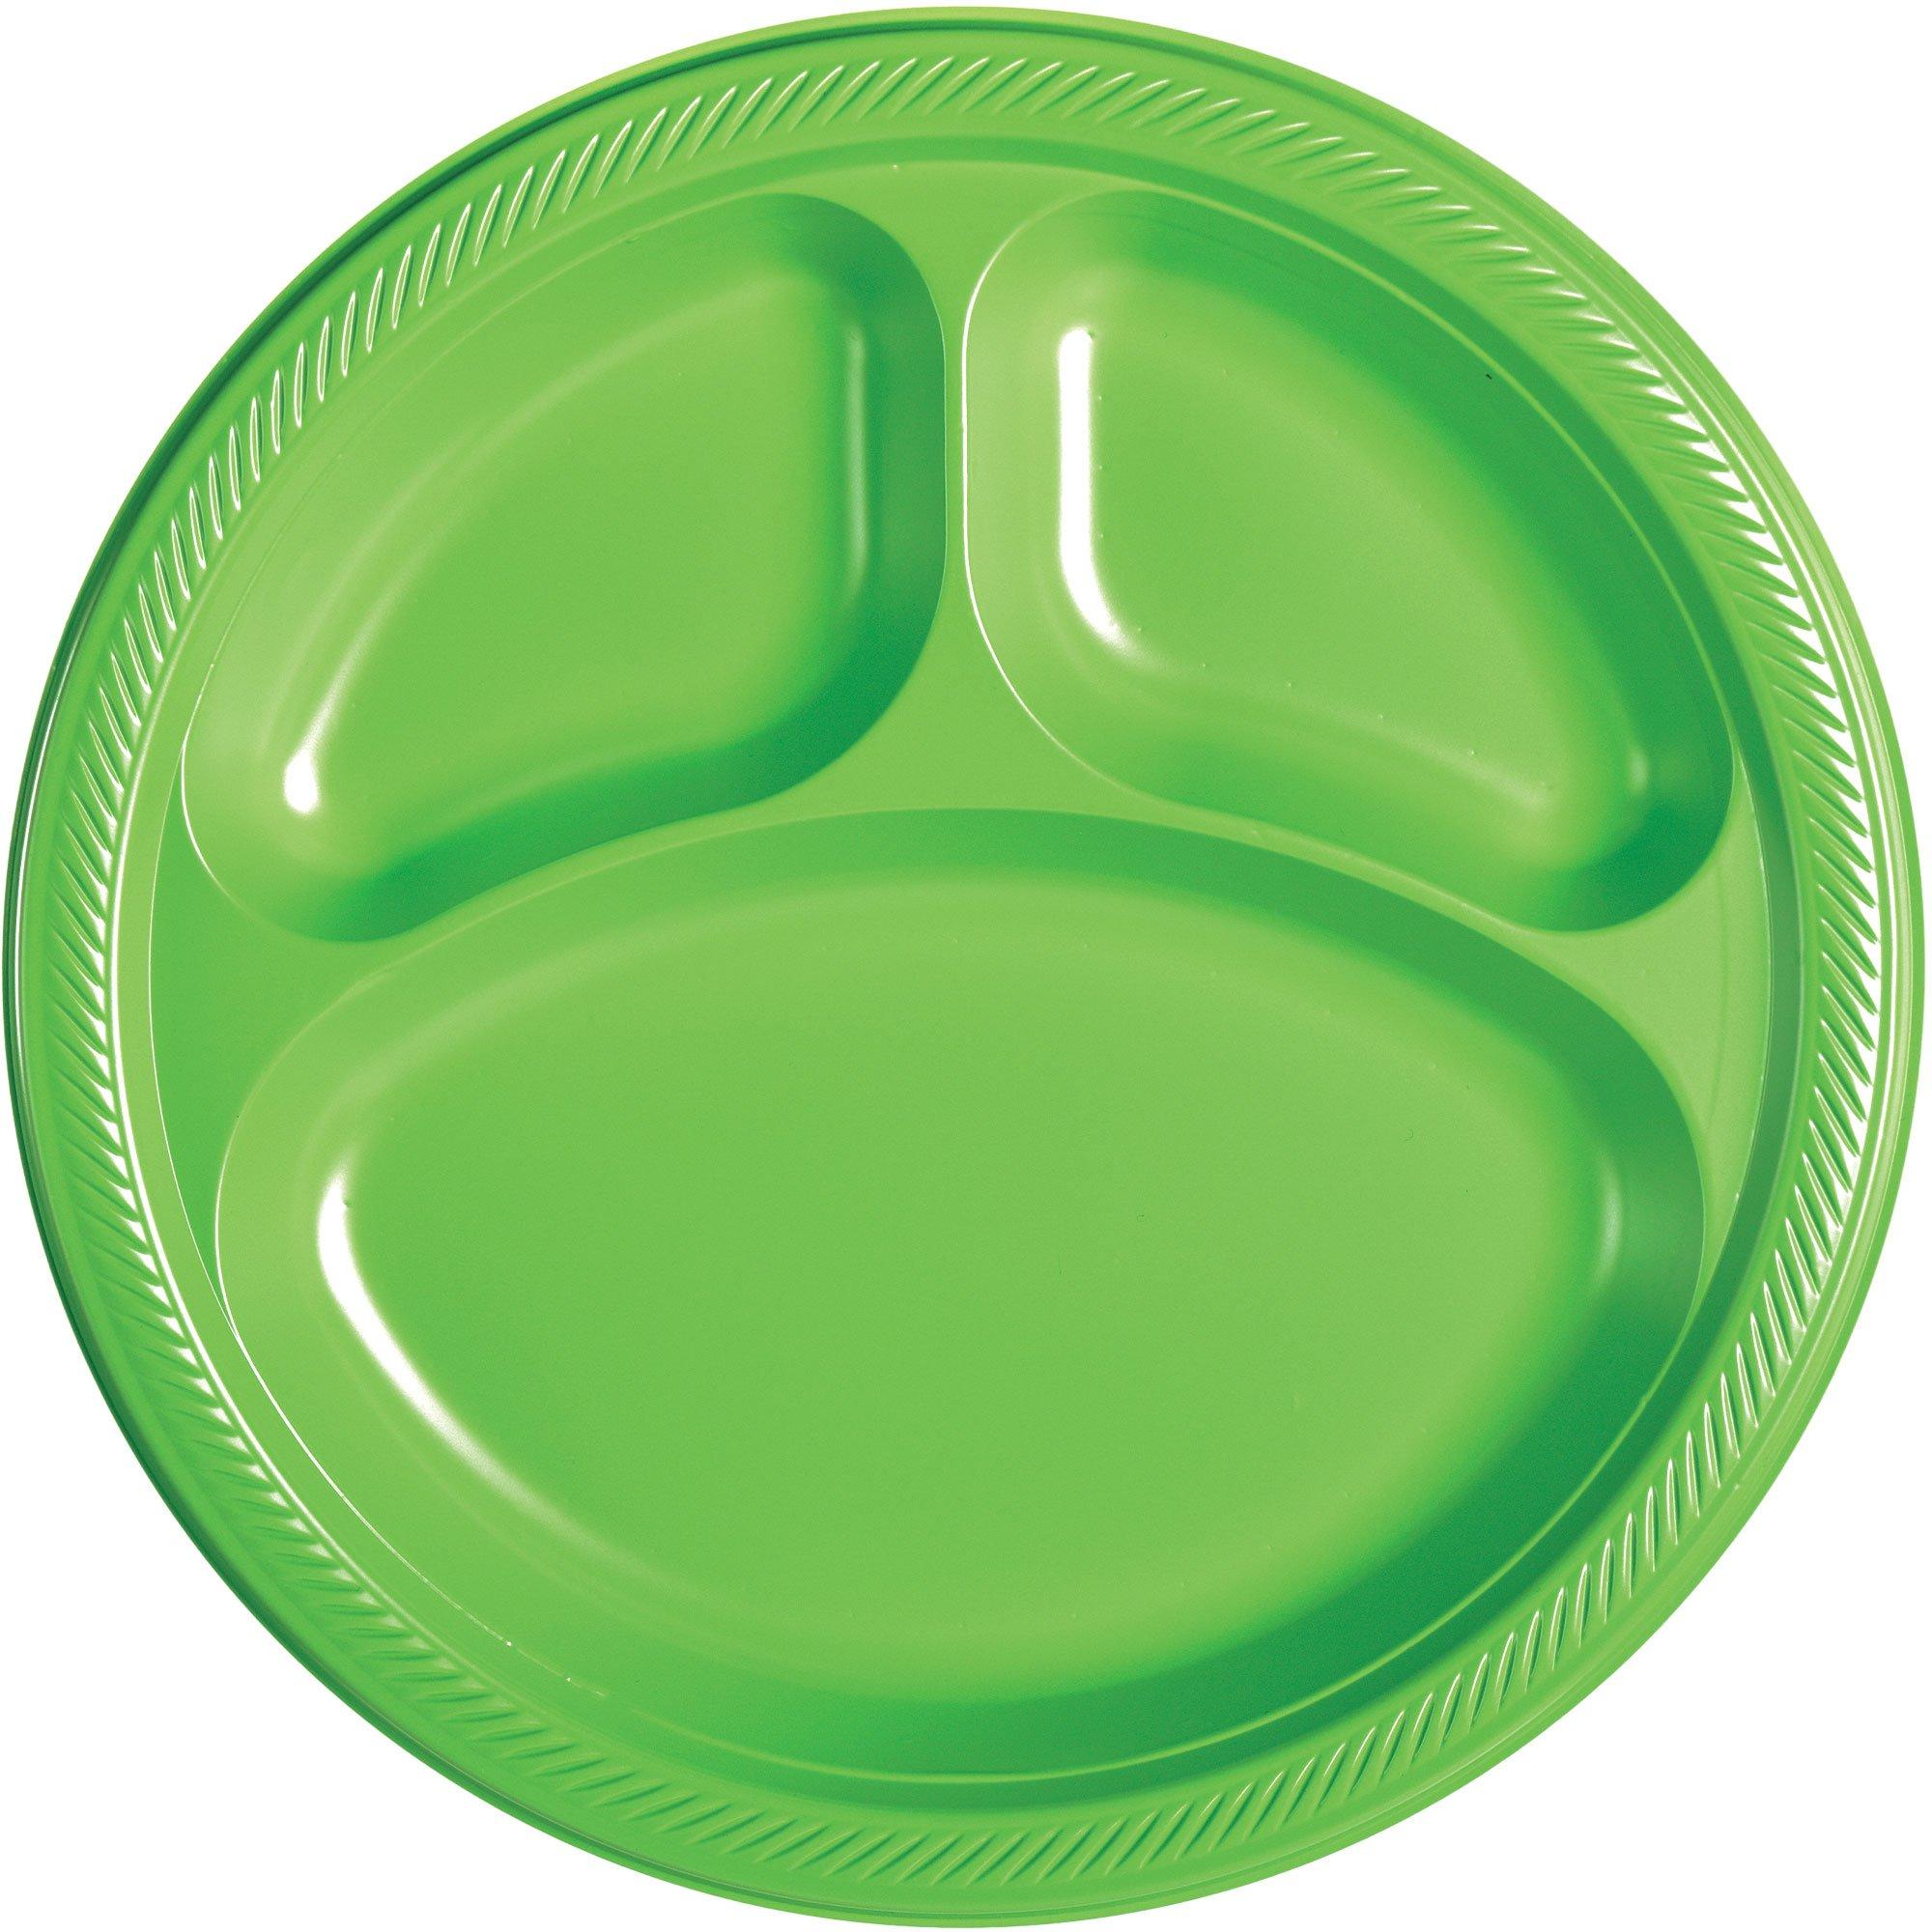 Disposable Plastic Plates Kiwi, 7 Inches Plastic Dessert Plates, Strong and  Sturdy Disposable Plates for Party, Dinner, Holiday, Picnic, or Travel